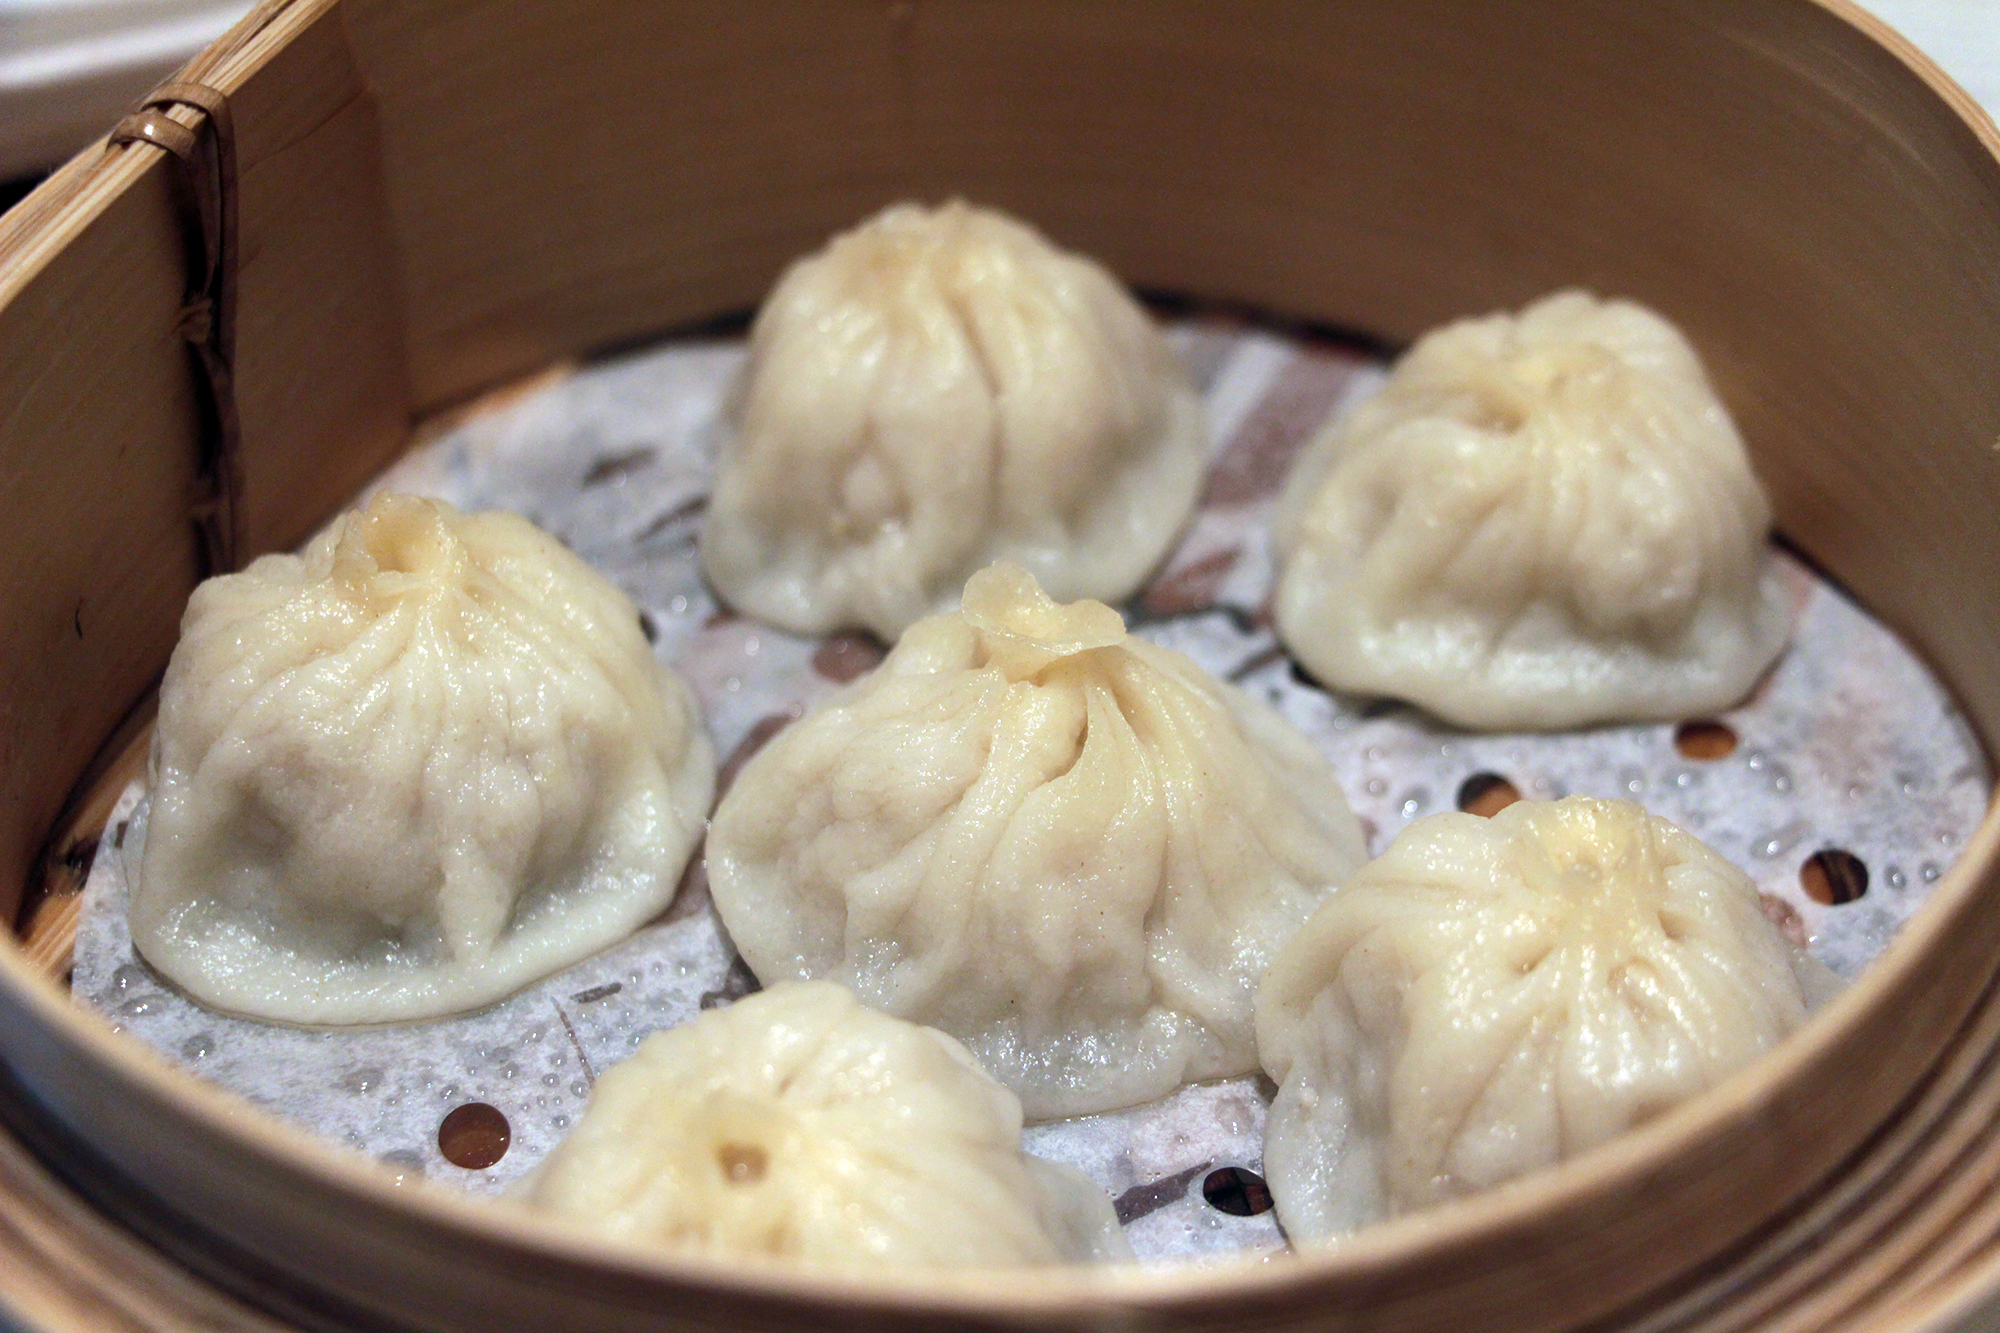 Xiao Long Bao 'XLB' filled with Rich Consumme at China Live